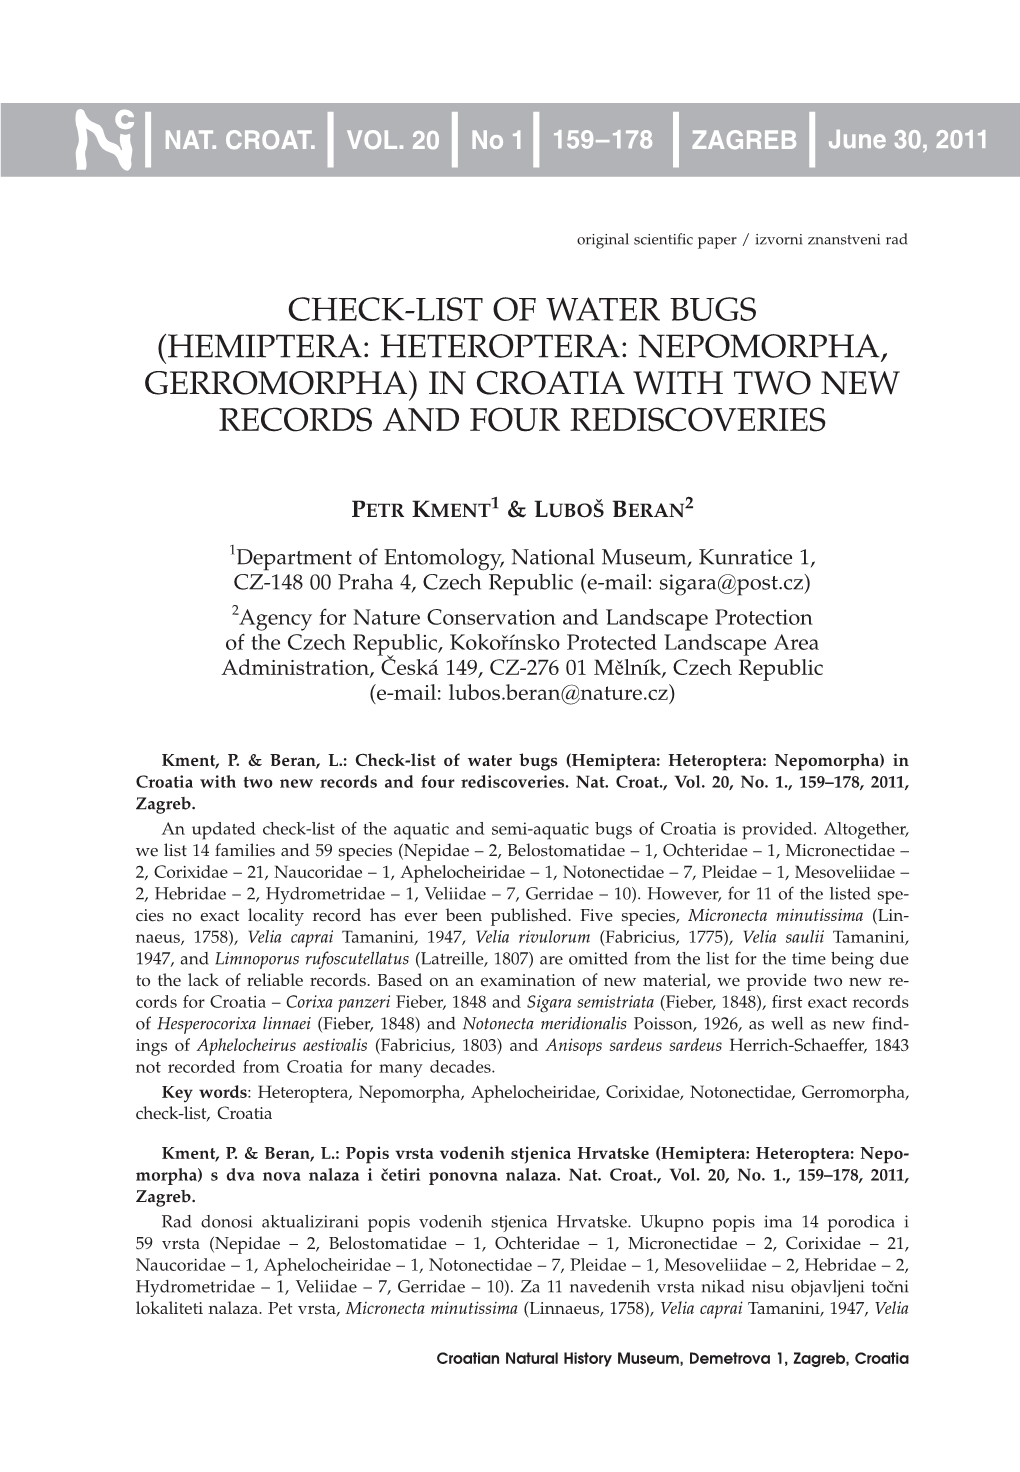 Check-List of Water Bugs (Hemiptera: Heteroptera: Nepomorpha, Gerromorpha) in Croatia with Two New Records and Four Rediscoveries